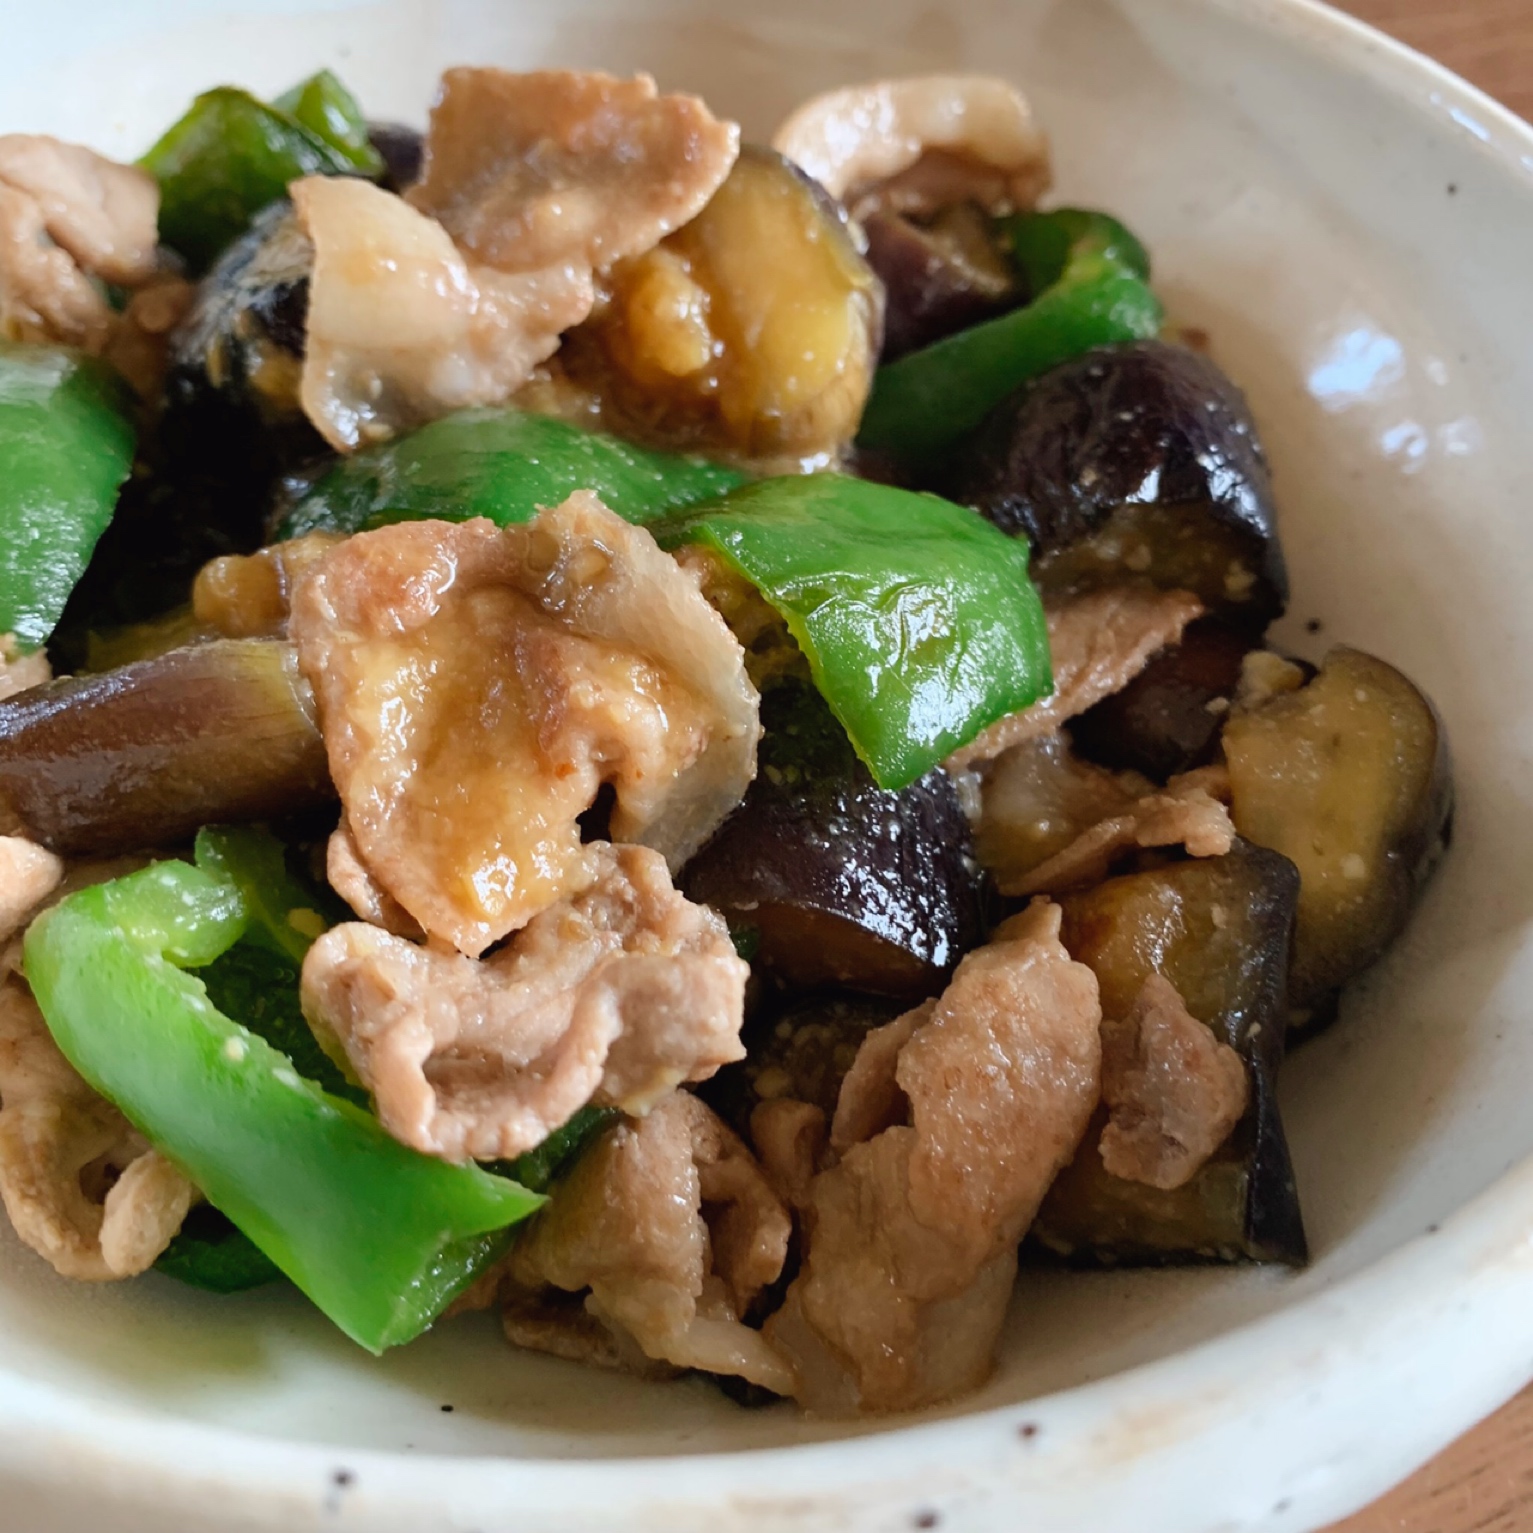 A stir-fried dish of pork, green pepper, and eggplant with miso.